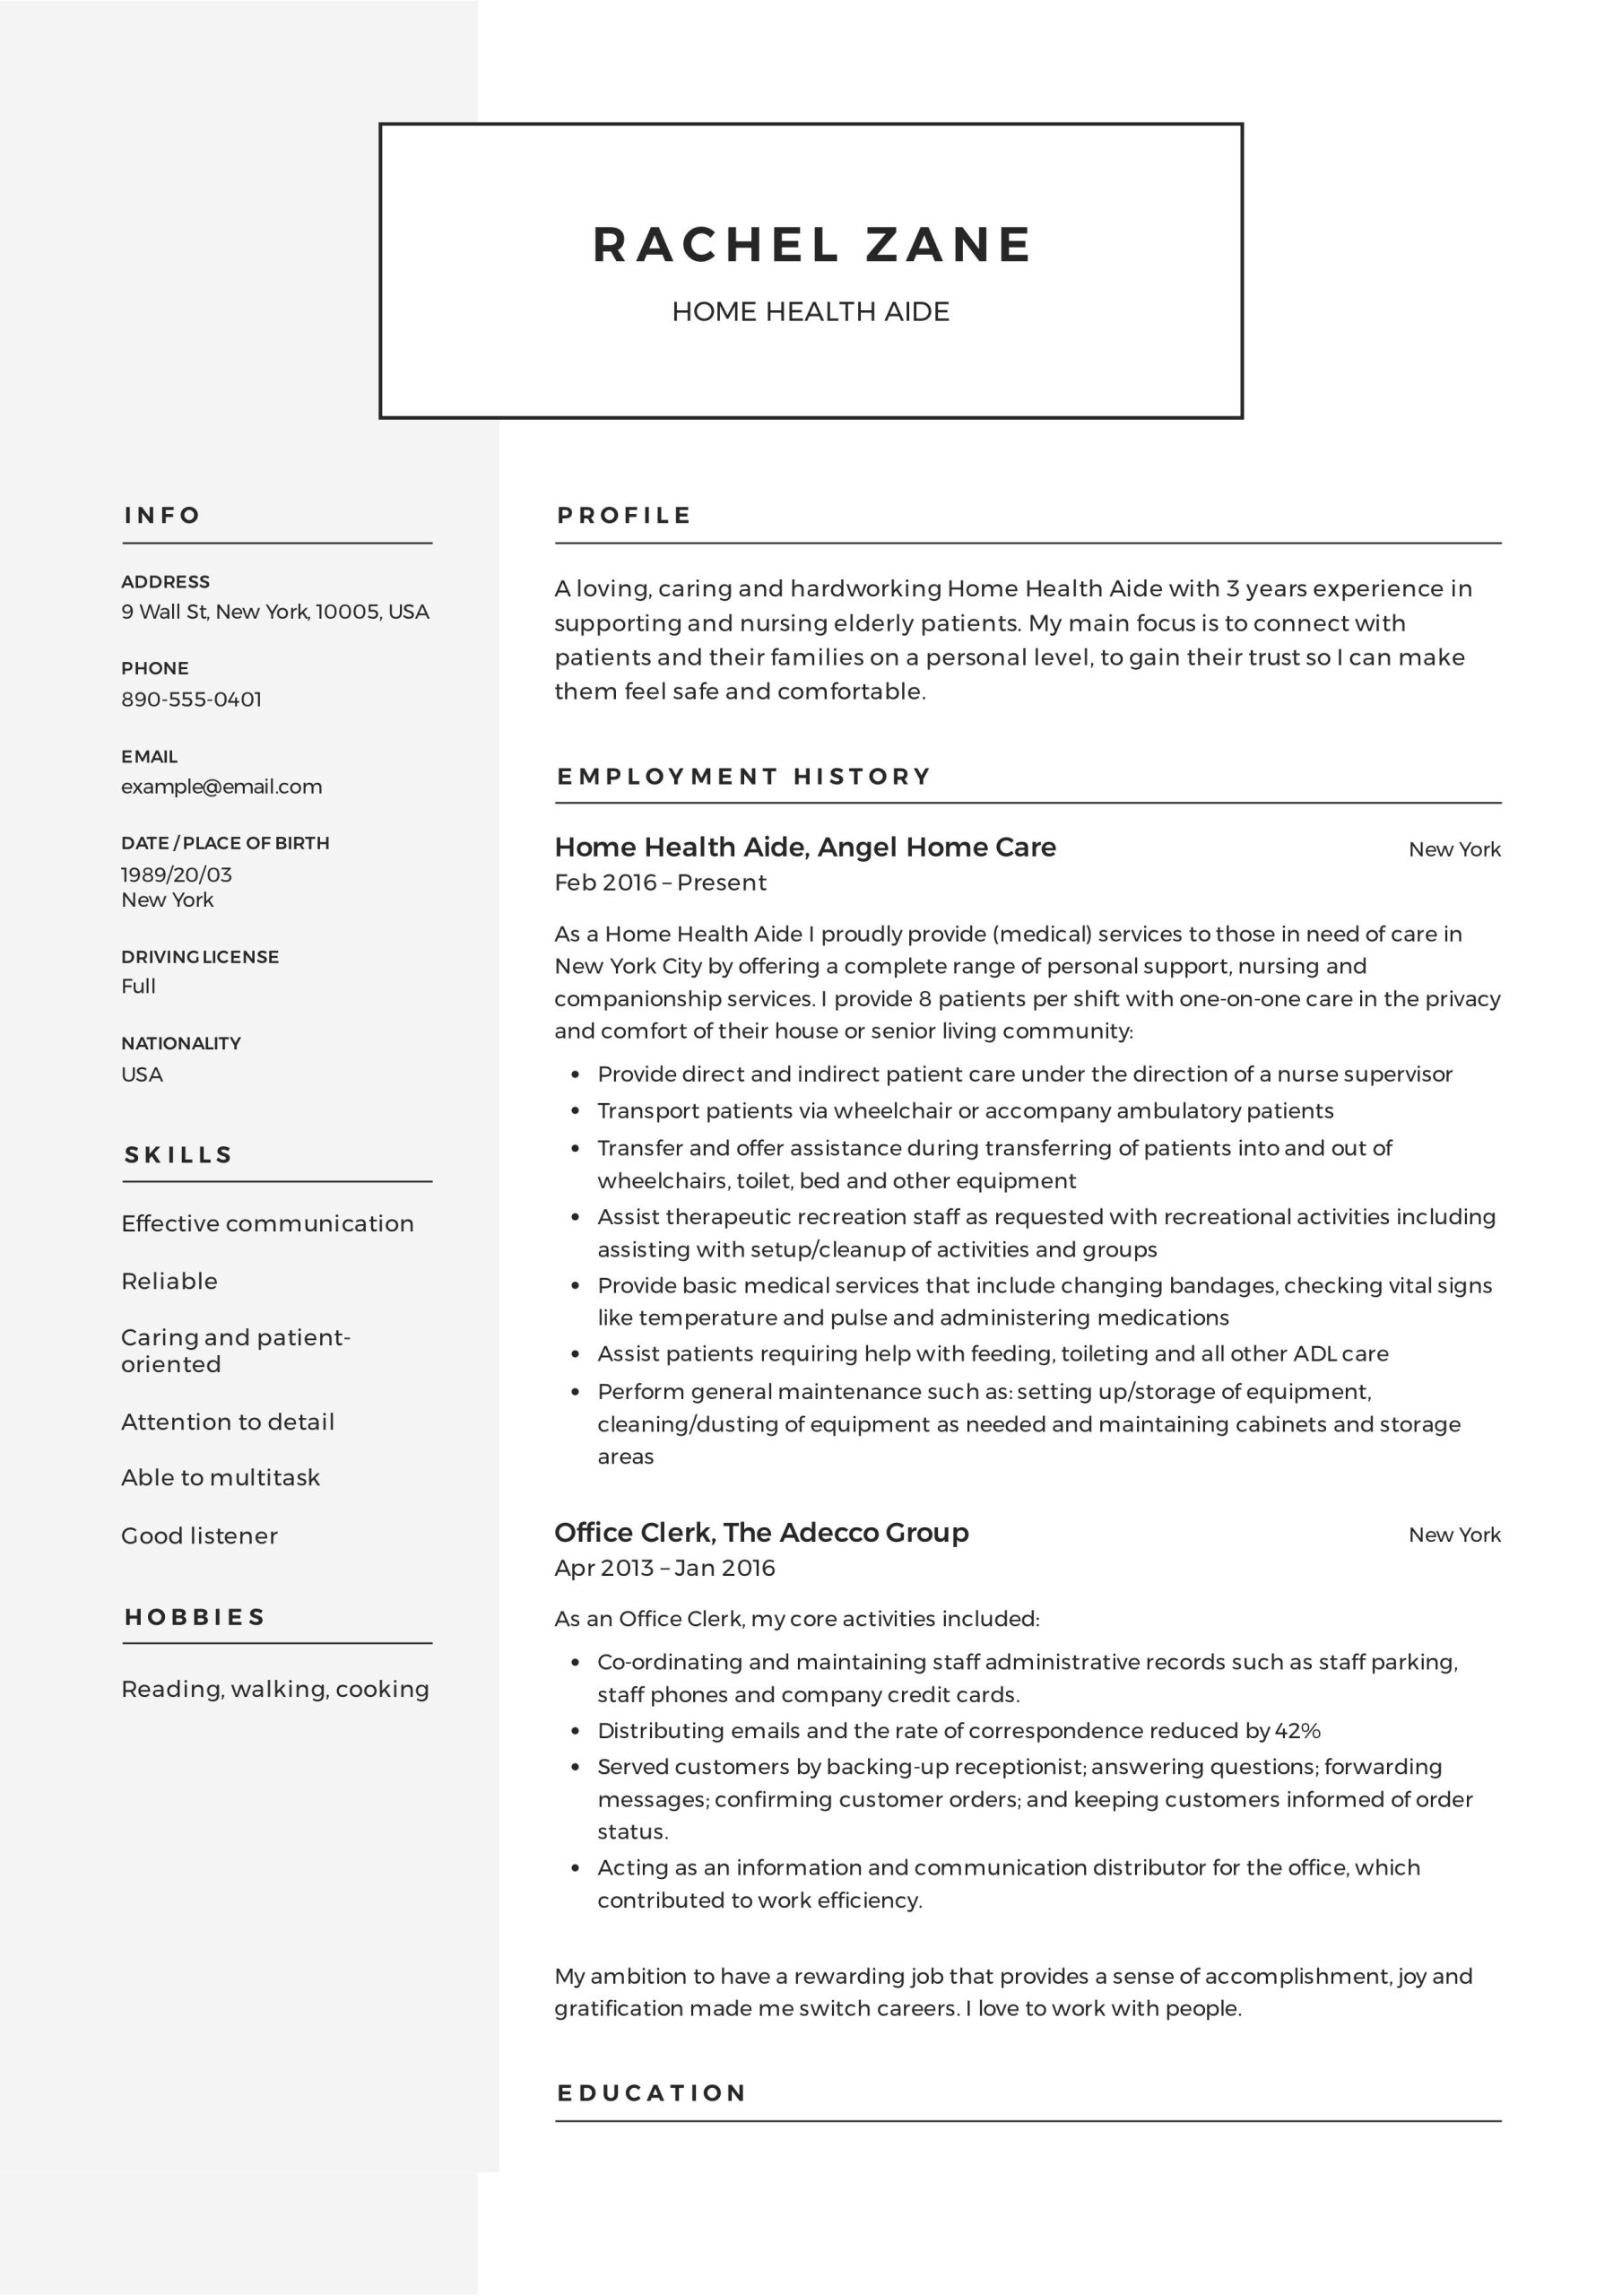 Sample Resume for Personal Care Provider Home Health Aide Resume Sample & Writing Guide –  12 Samples Pdf